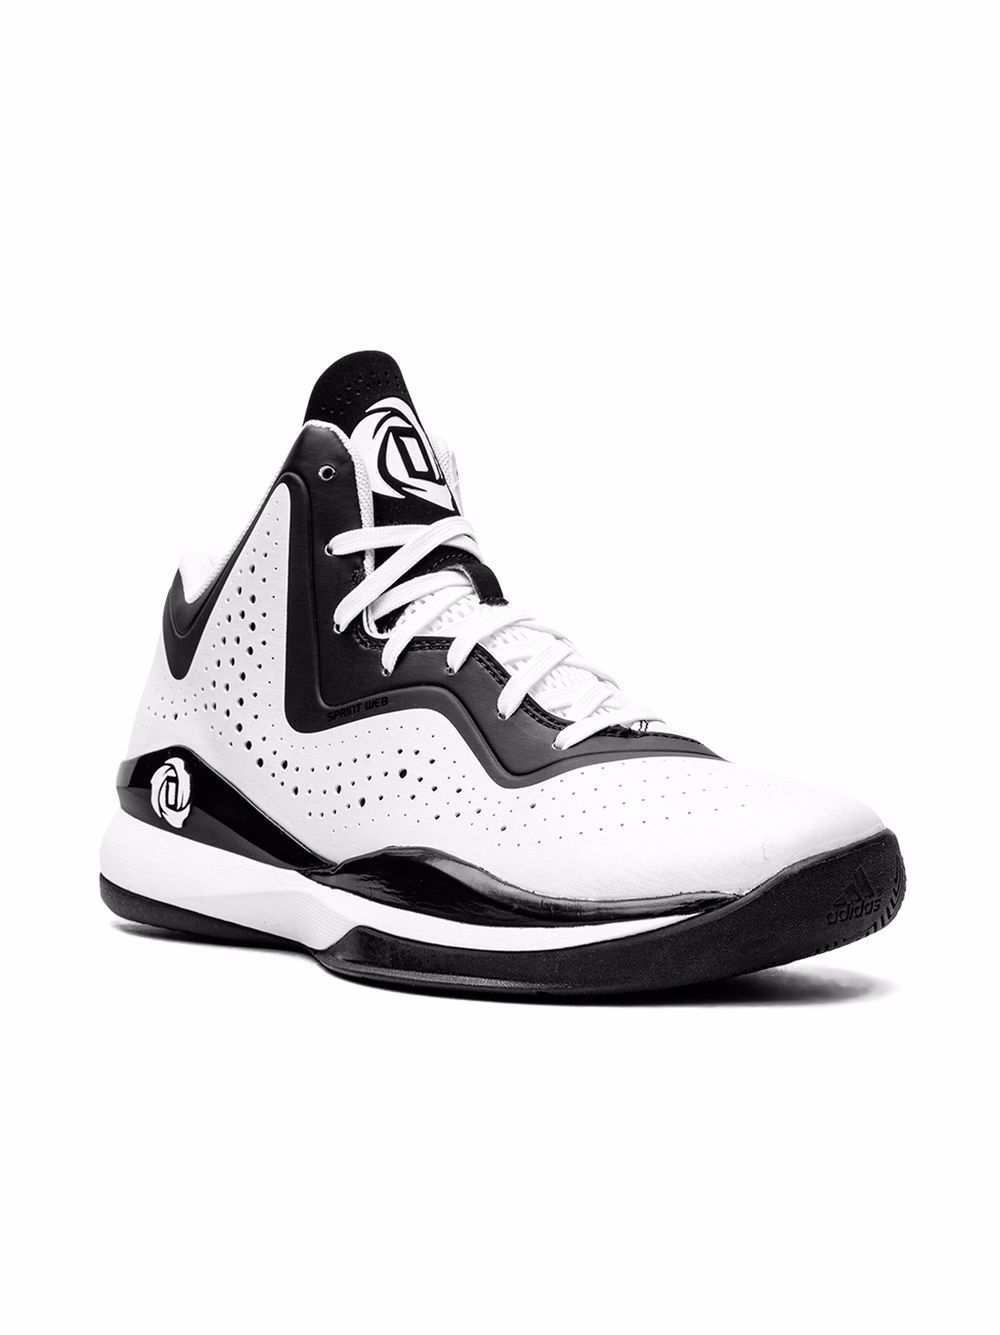 derrick rose shoes 773 black and white